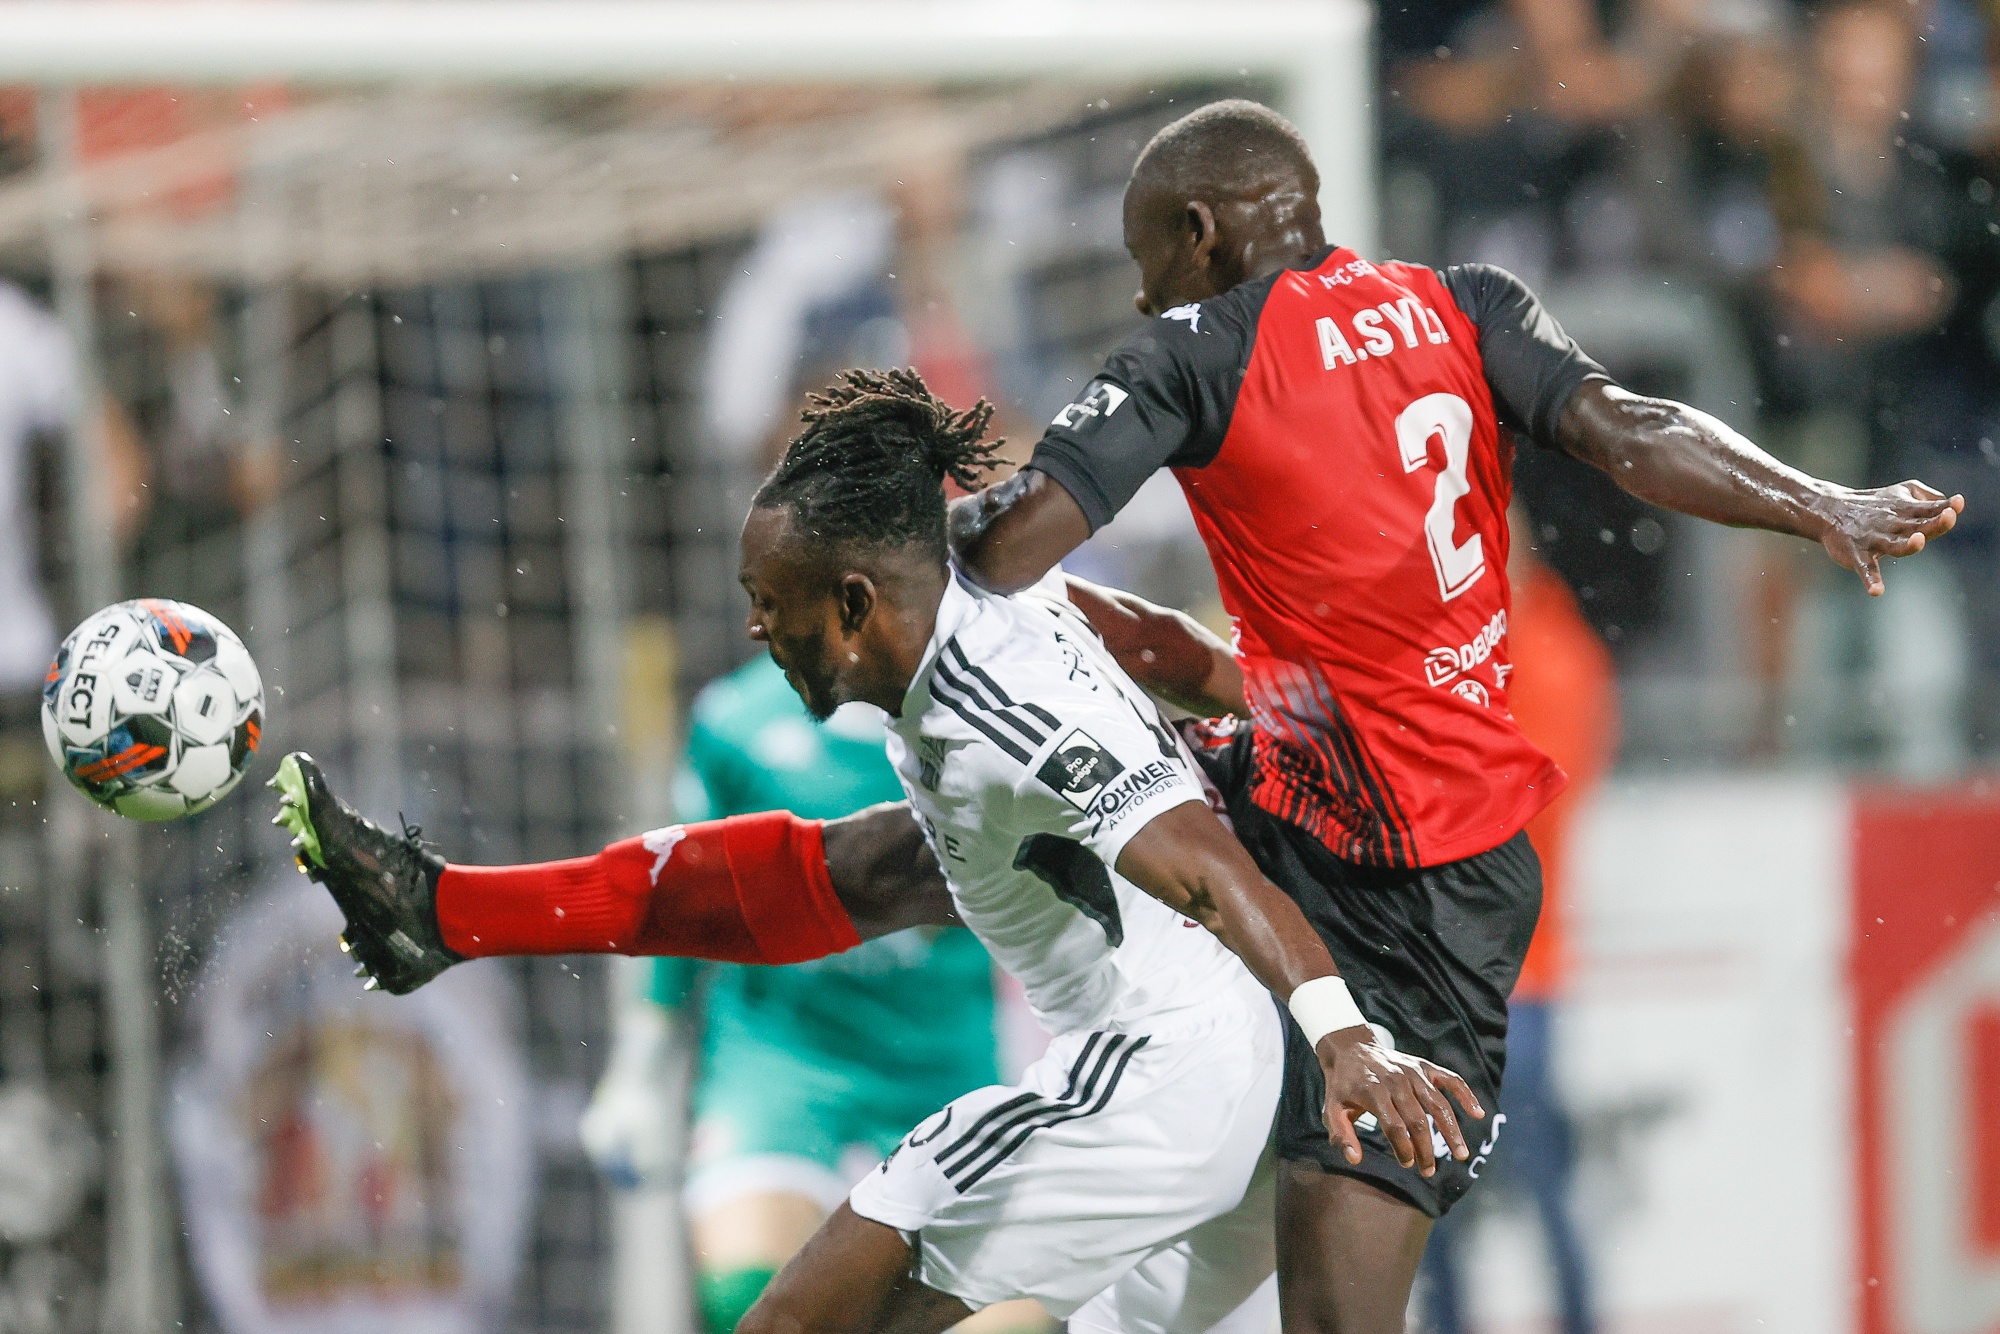 Eupen's Regan Charles-Cook and Seraing's Abdoulaye Sylla fight for the ball during a soccer match between KAS Eupen and RFC Seraing, Friday 19 August 2022 in Eupen, on day 5 of the 2022-2023 'Jupiler Pro League' first division of the Belgian championship. BELGA PHOTO BRUNO FAHY